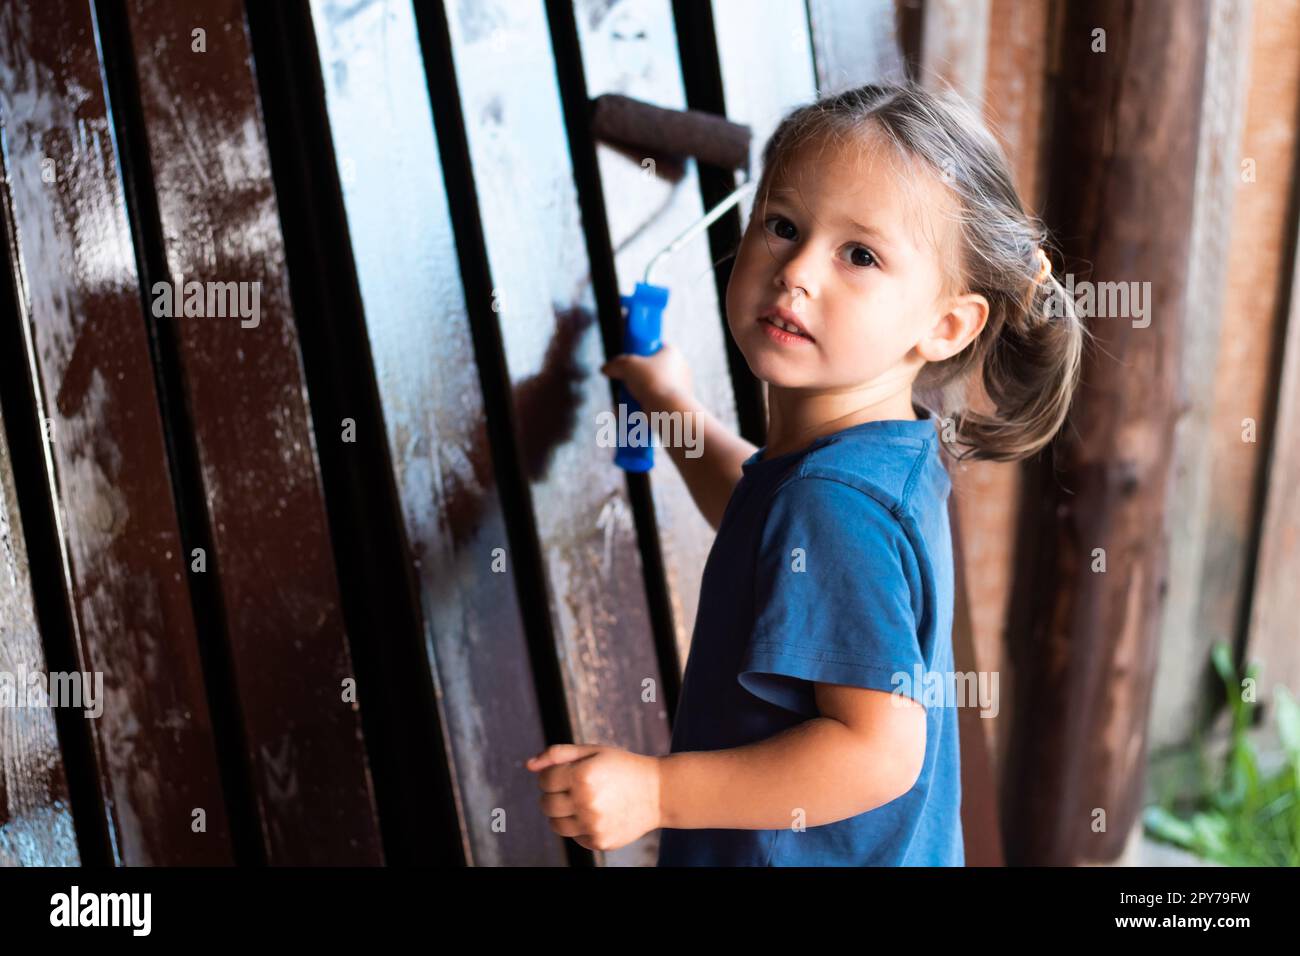 Cute blonde little girl carry out painting work, coloring wooden fence border with paint roller and looking at camera Stock Photo